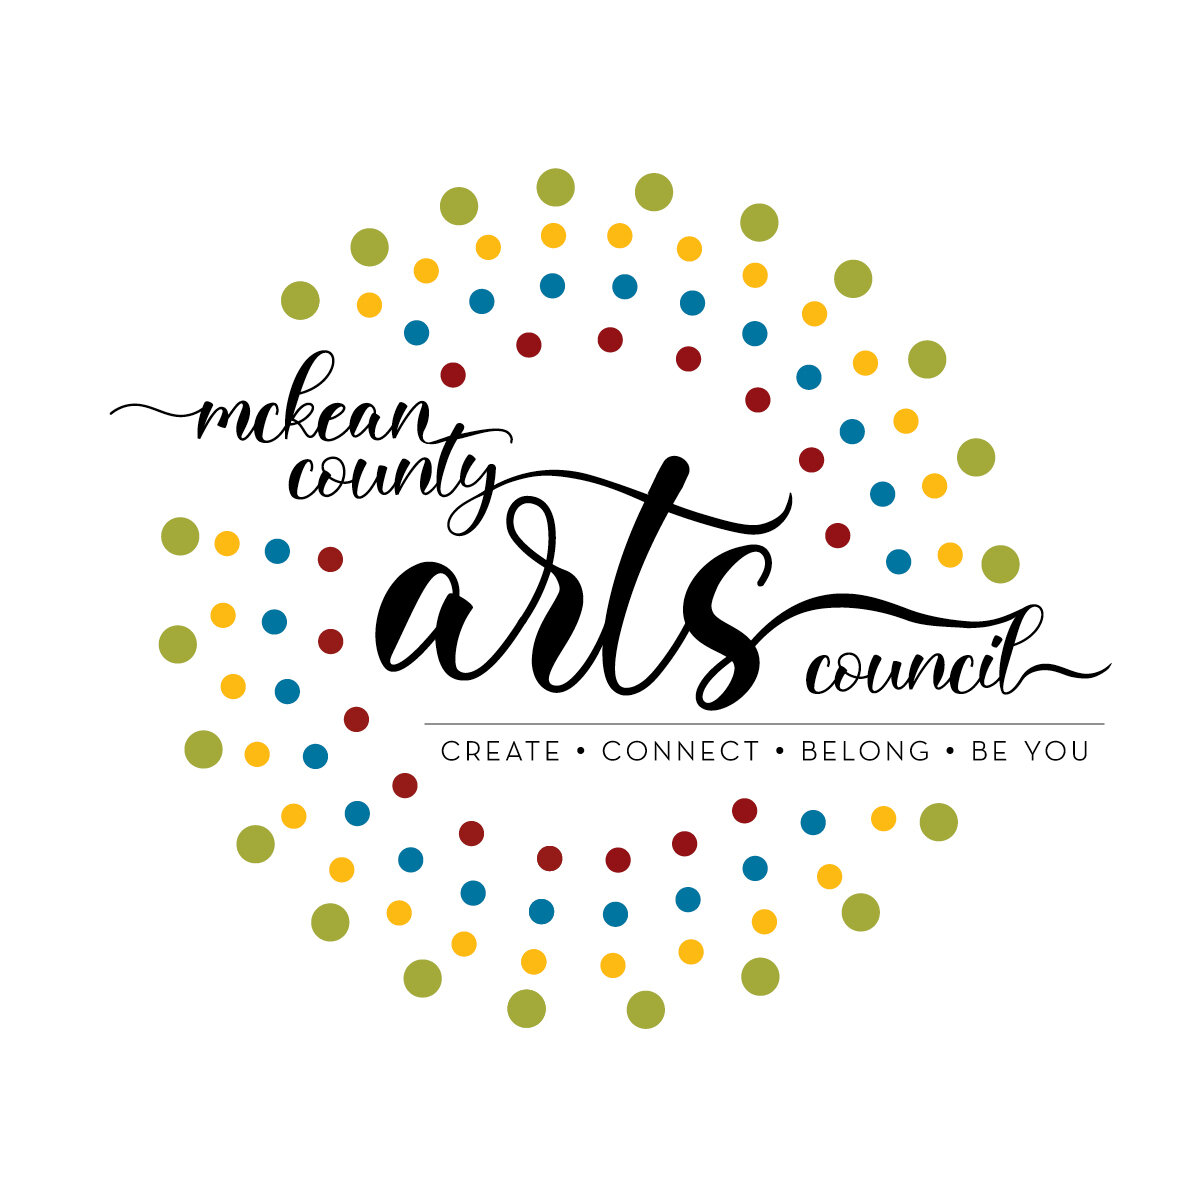 Arts Council of McKean County